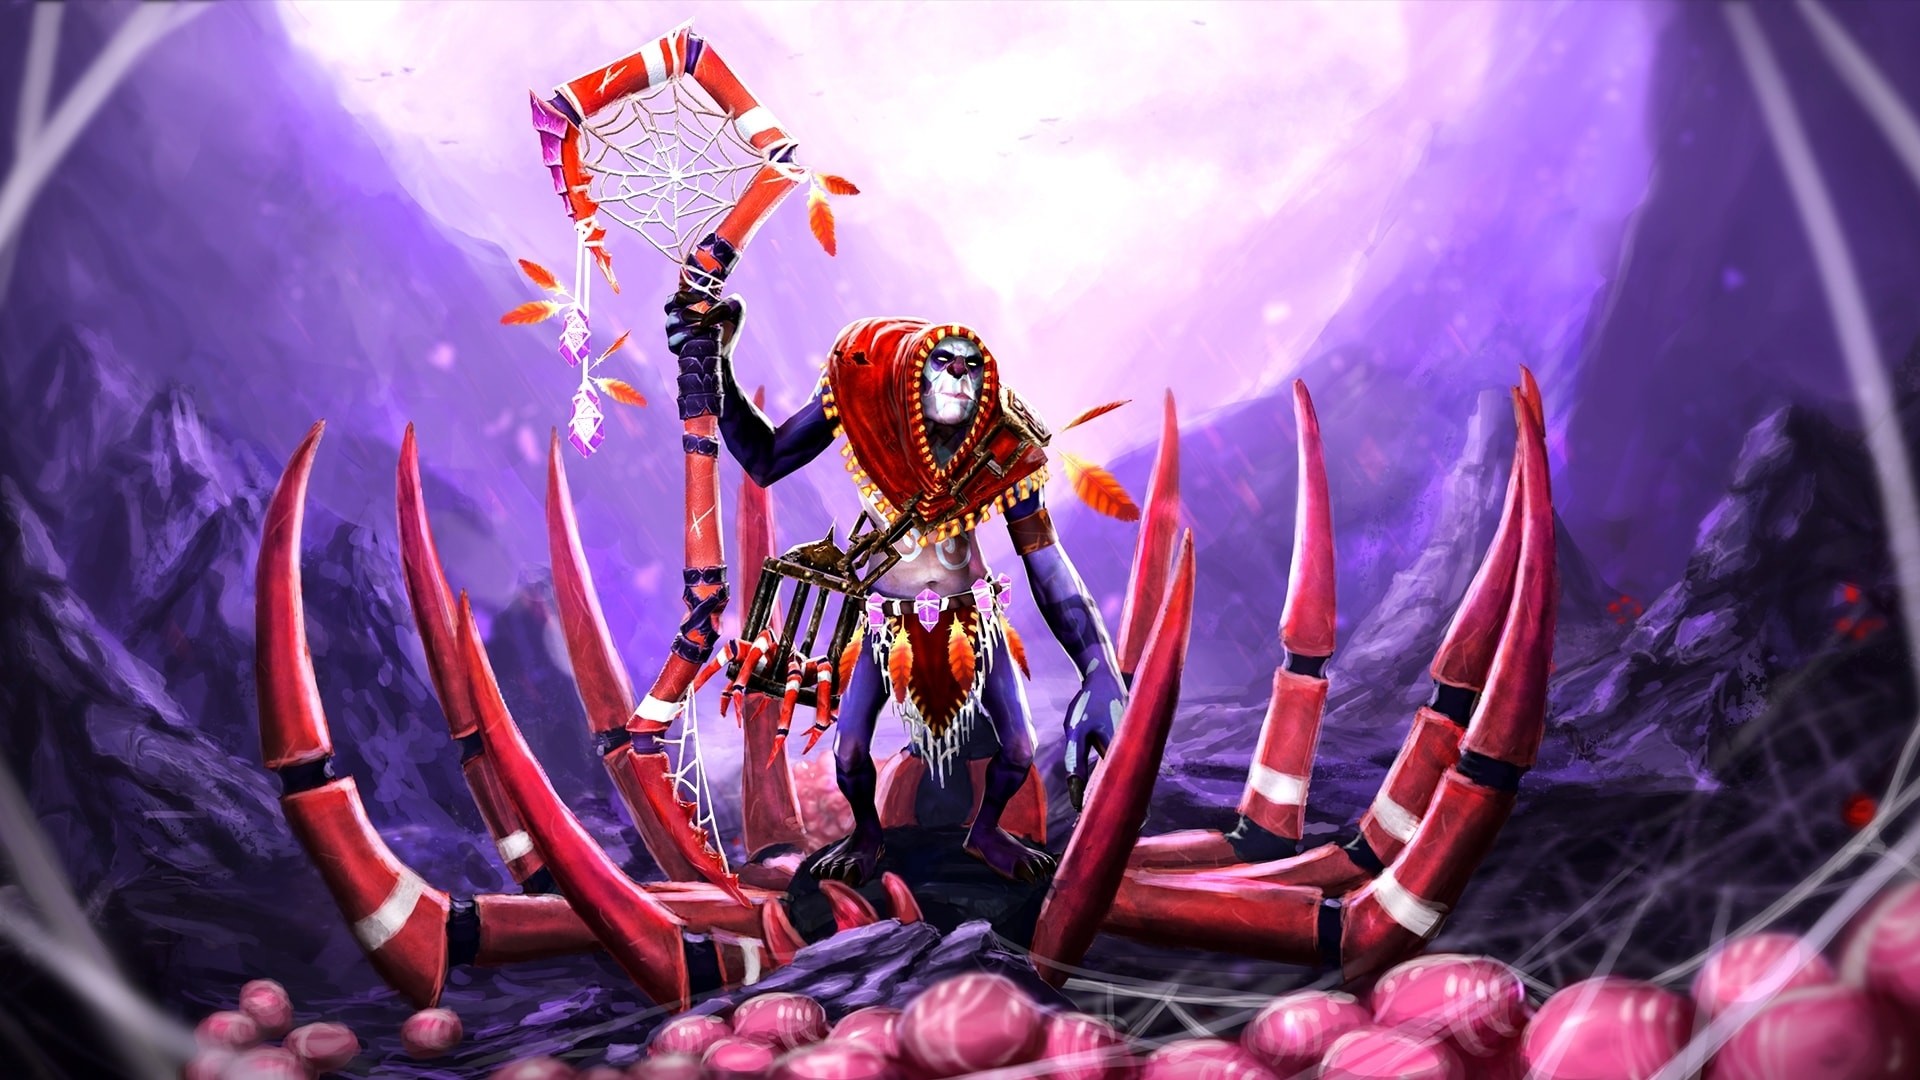 1920x1080 Search Results for “witch doctor dota 2 wallpaper” – Adorable Wallpapers